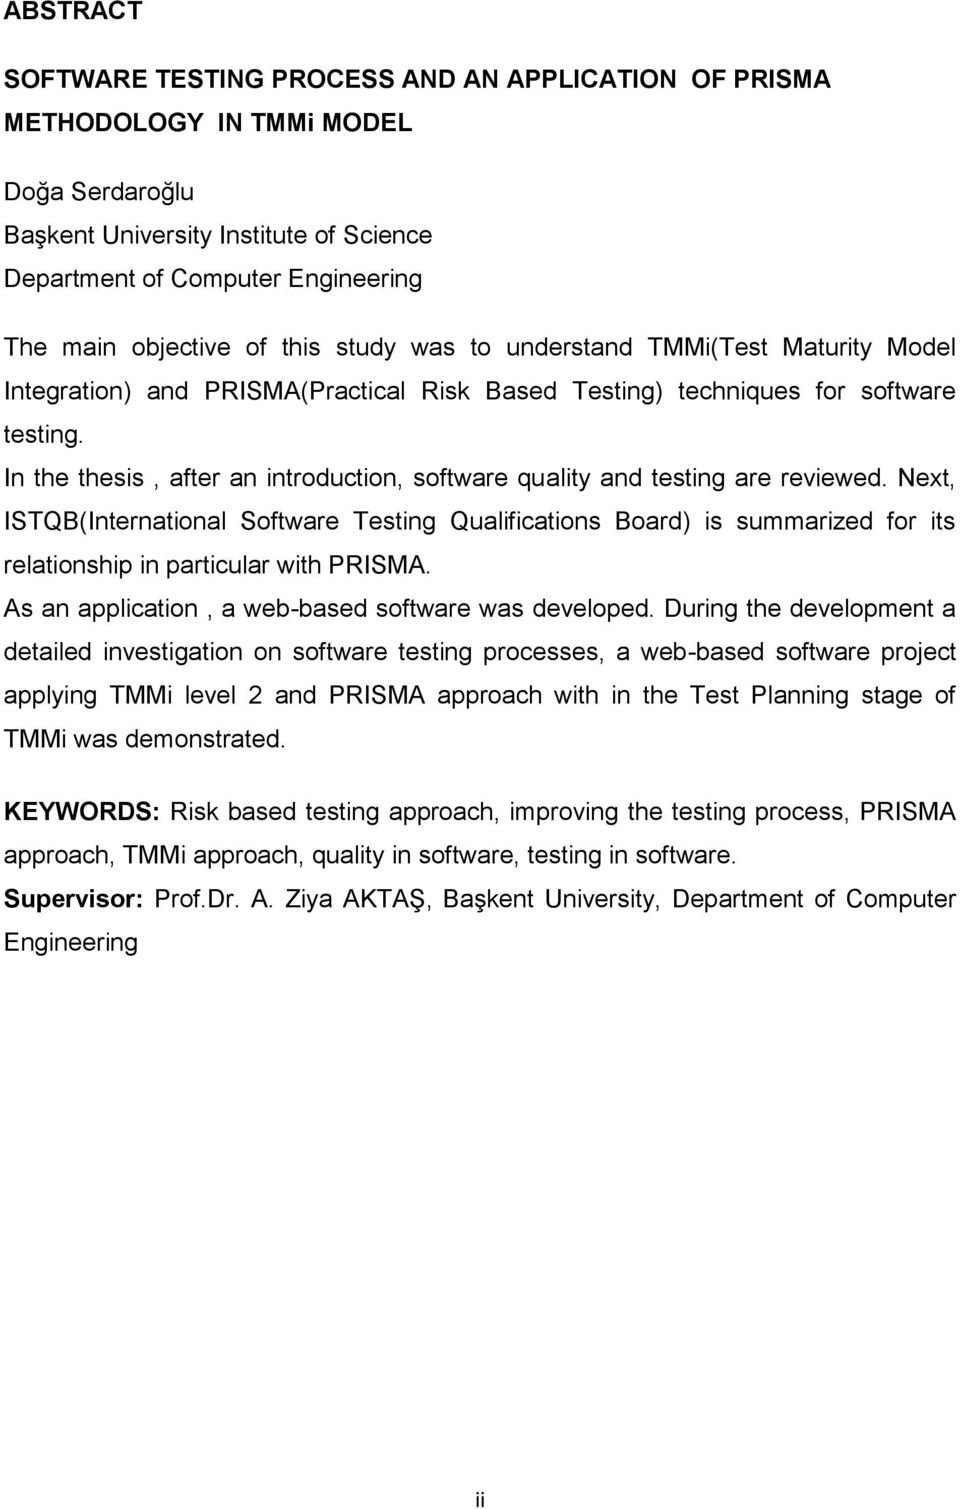 In the thesis, after an introduction, software quality and testing are reviewed.